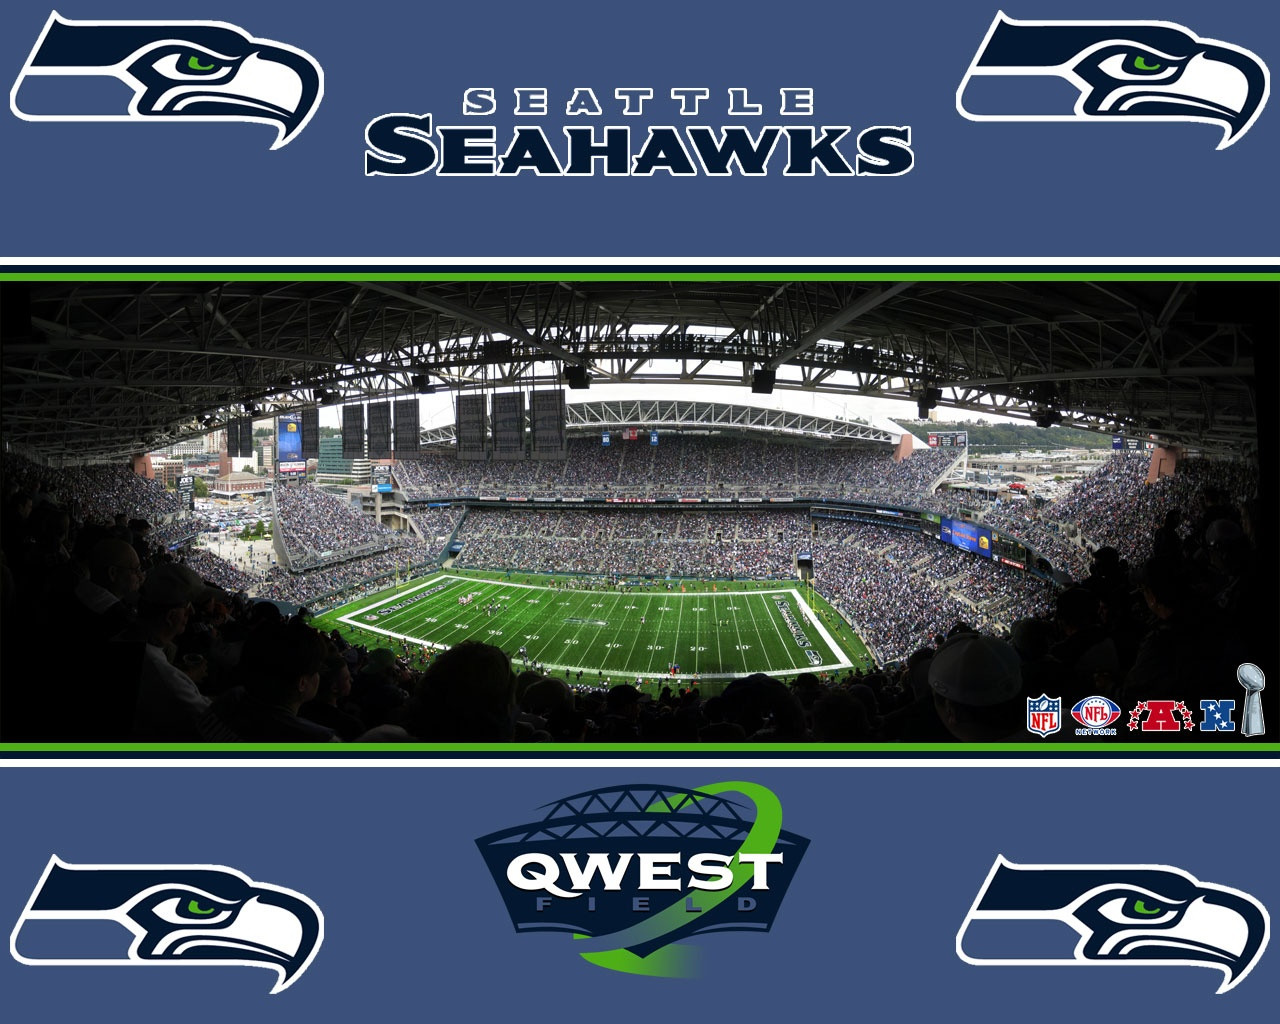 Seattle Seahawk Stadium Backgrounds Wallpapers Backgrounds Images